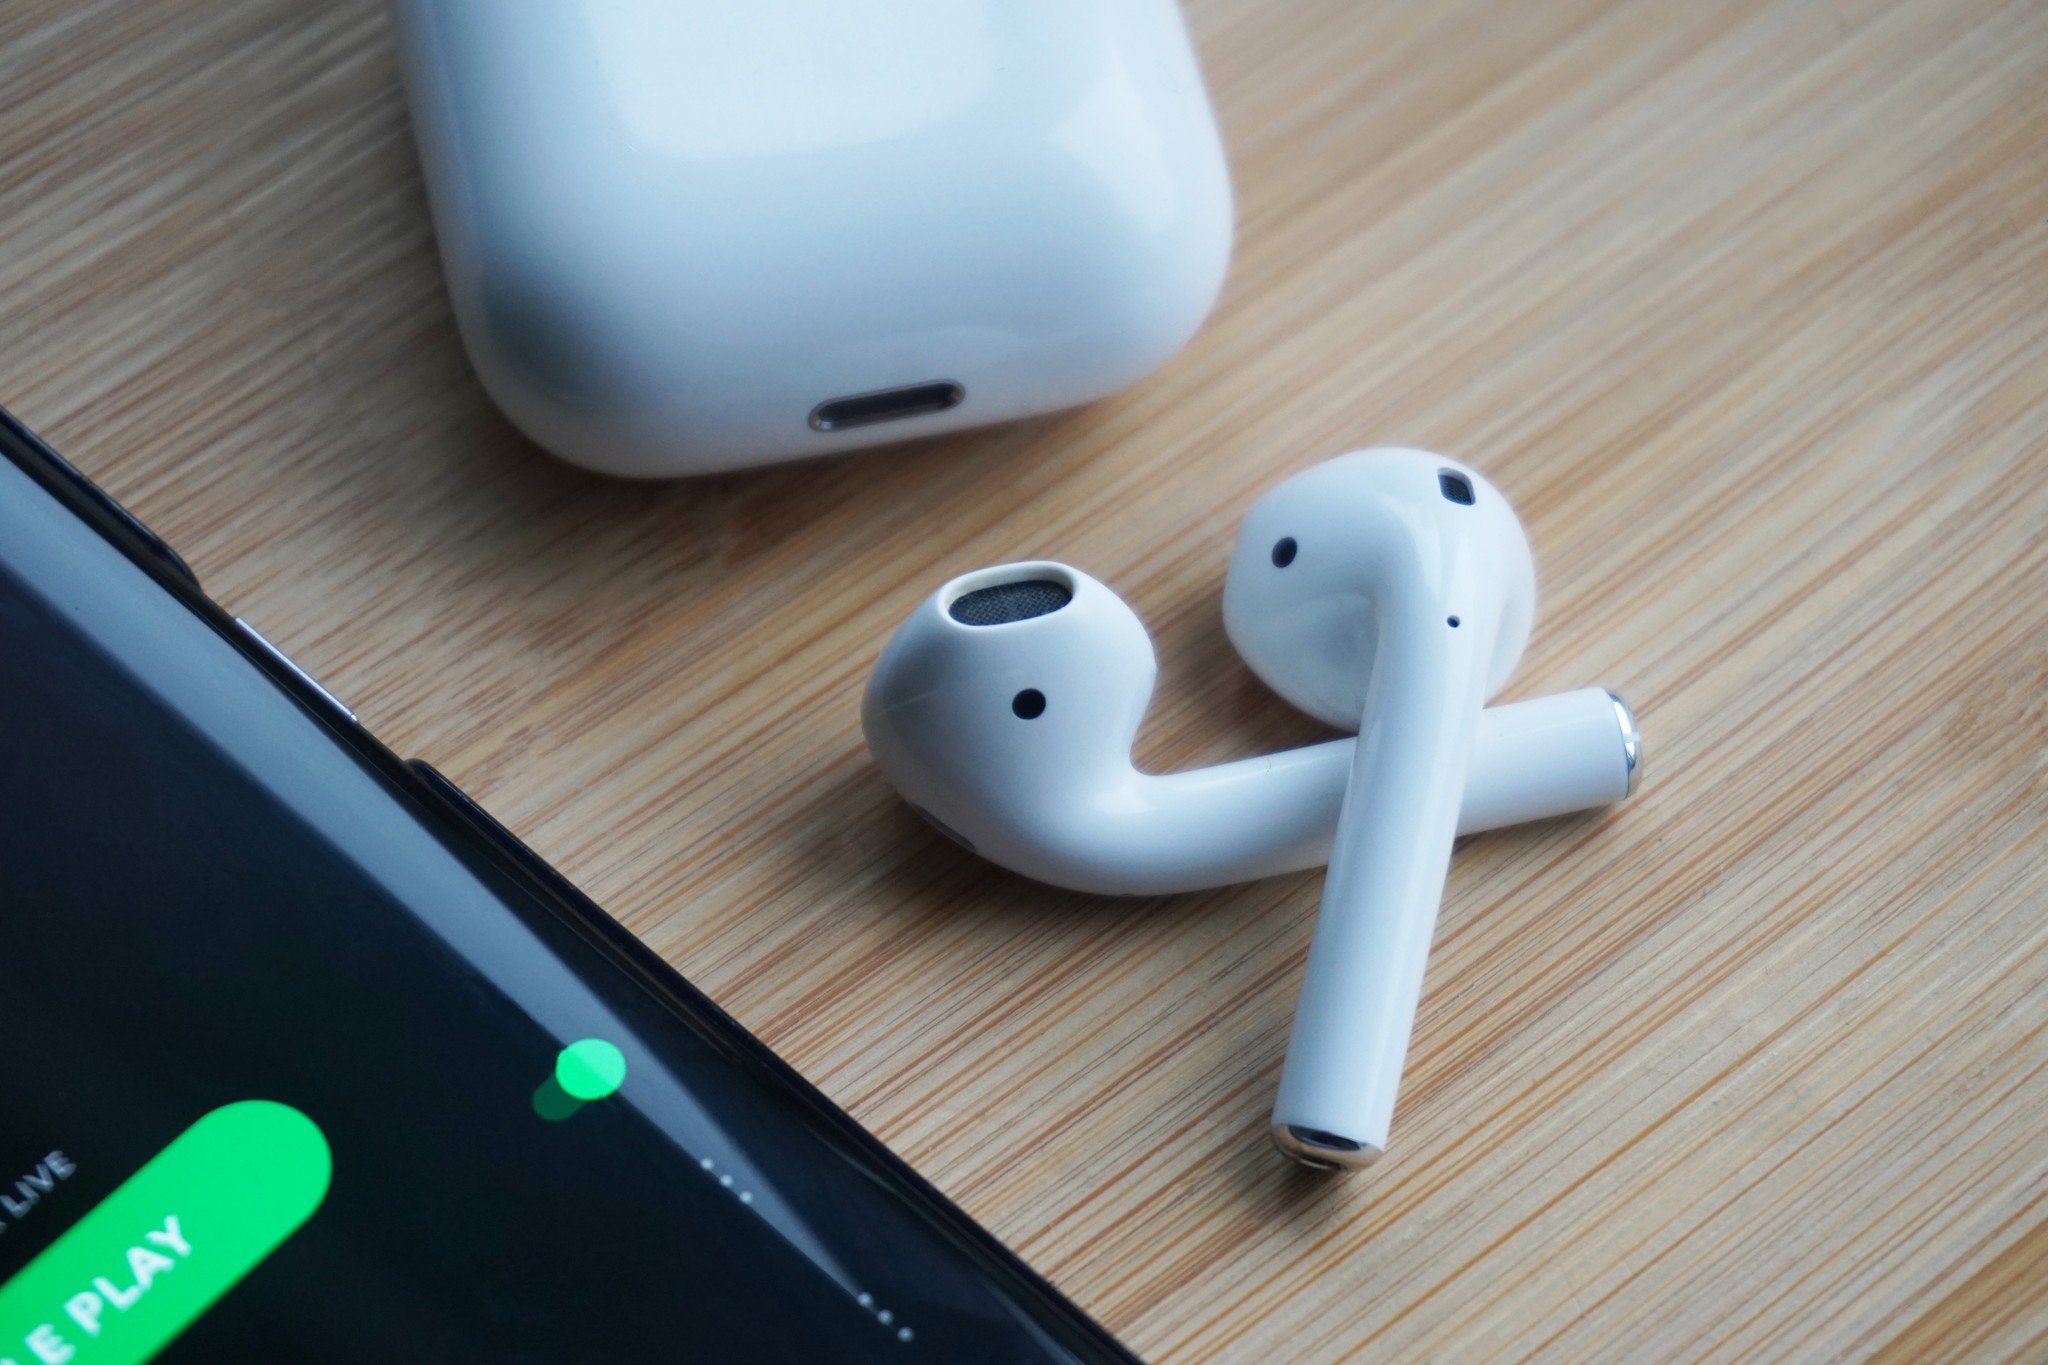 Expensive Labe Situation Do Apple AirPods work with Windows 10 PCs? | Windows Central